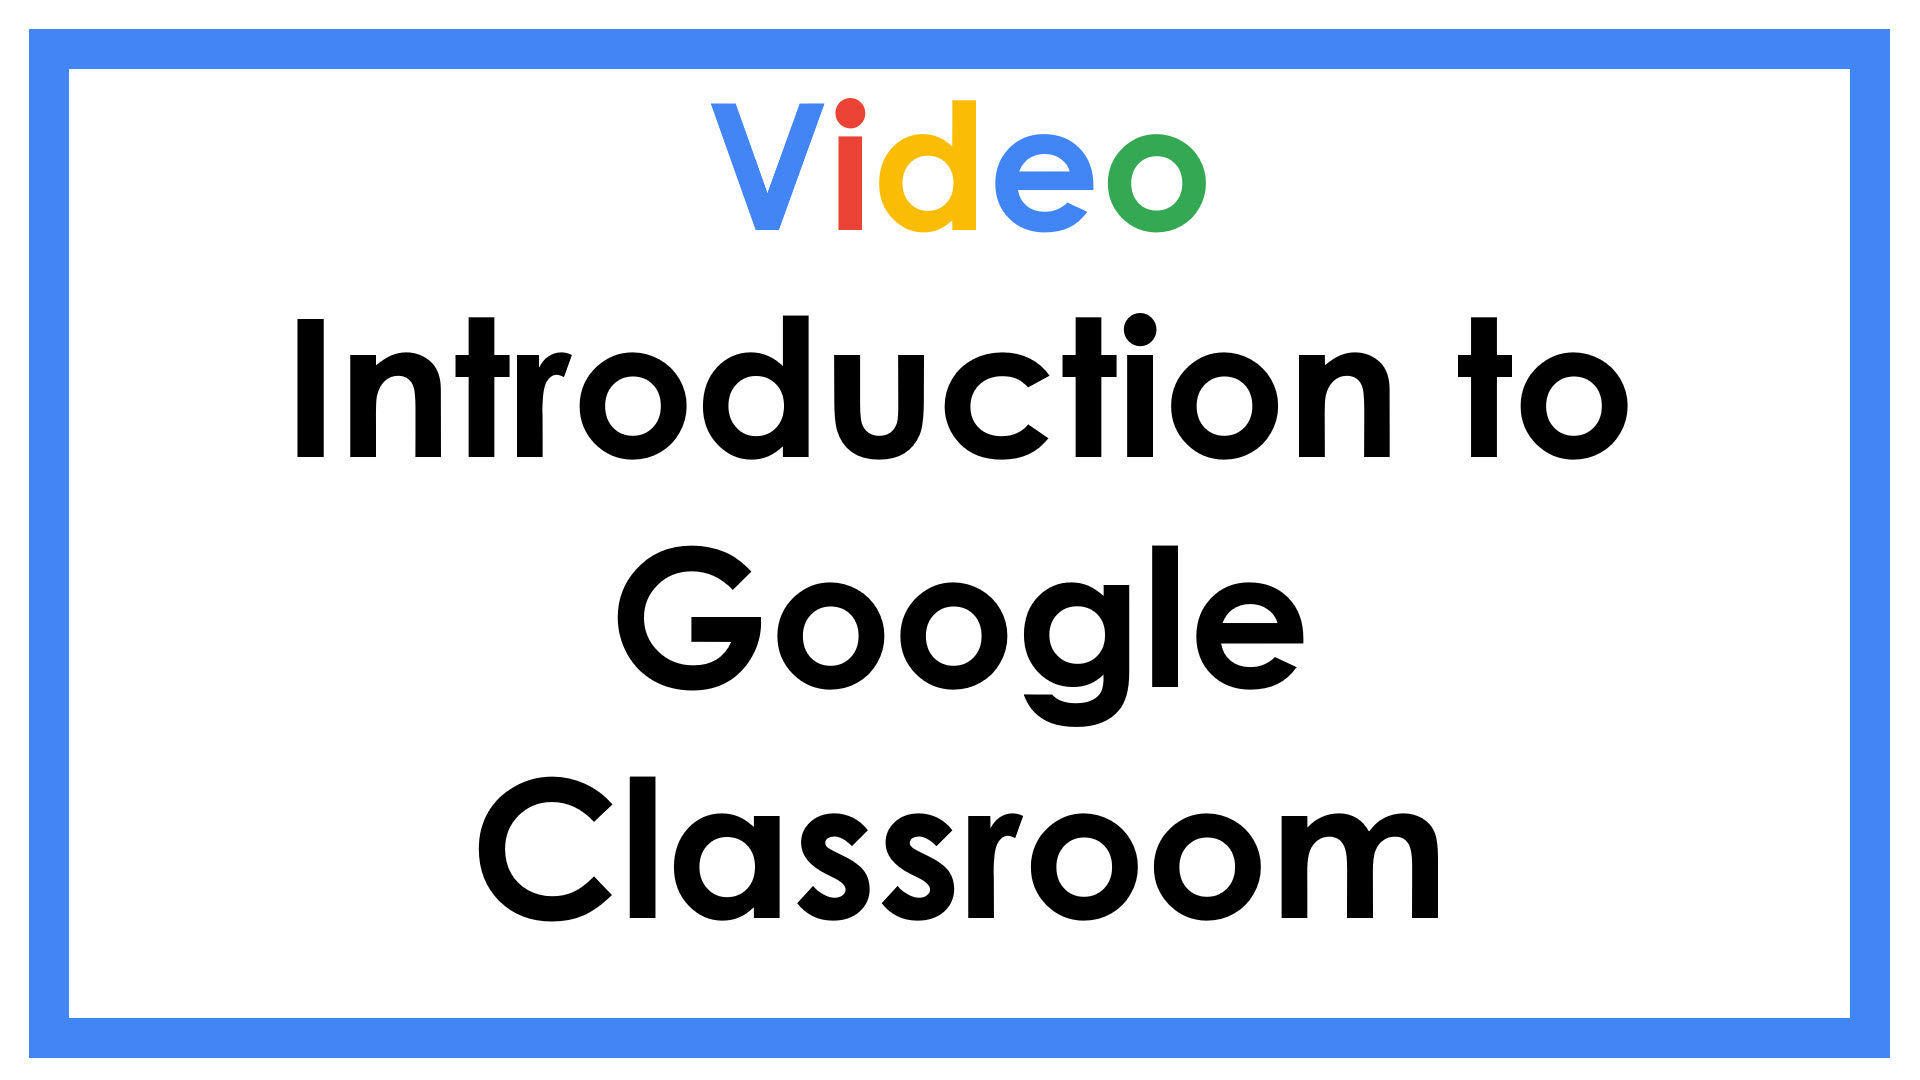 Video Introduction to Google Classroom